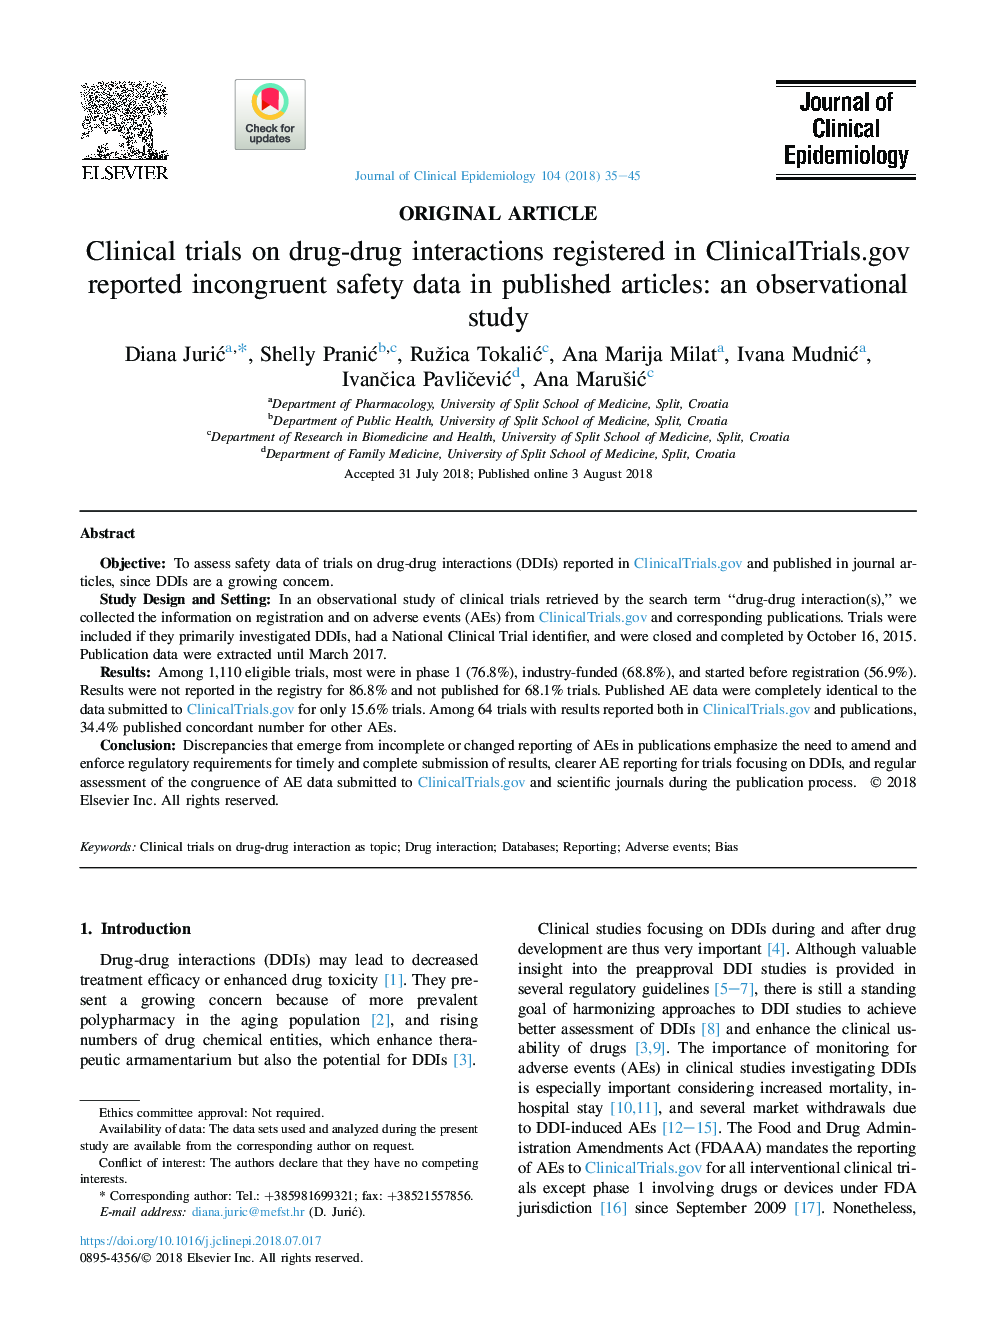 Clinical trials on drug-drug interactions registered in ClinicalTrials.gov reported incongruent safety data in published articles: an observational study